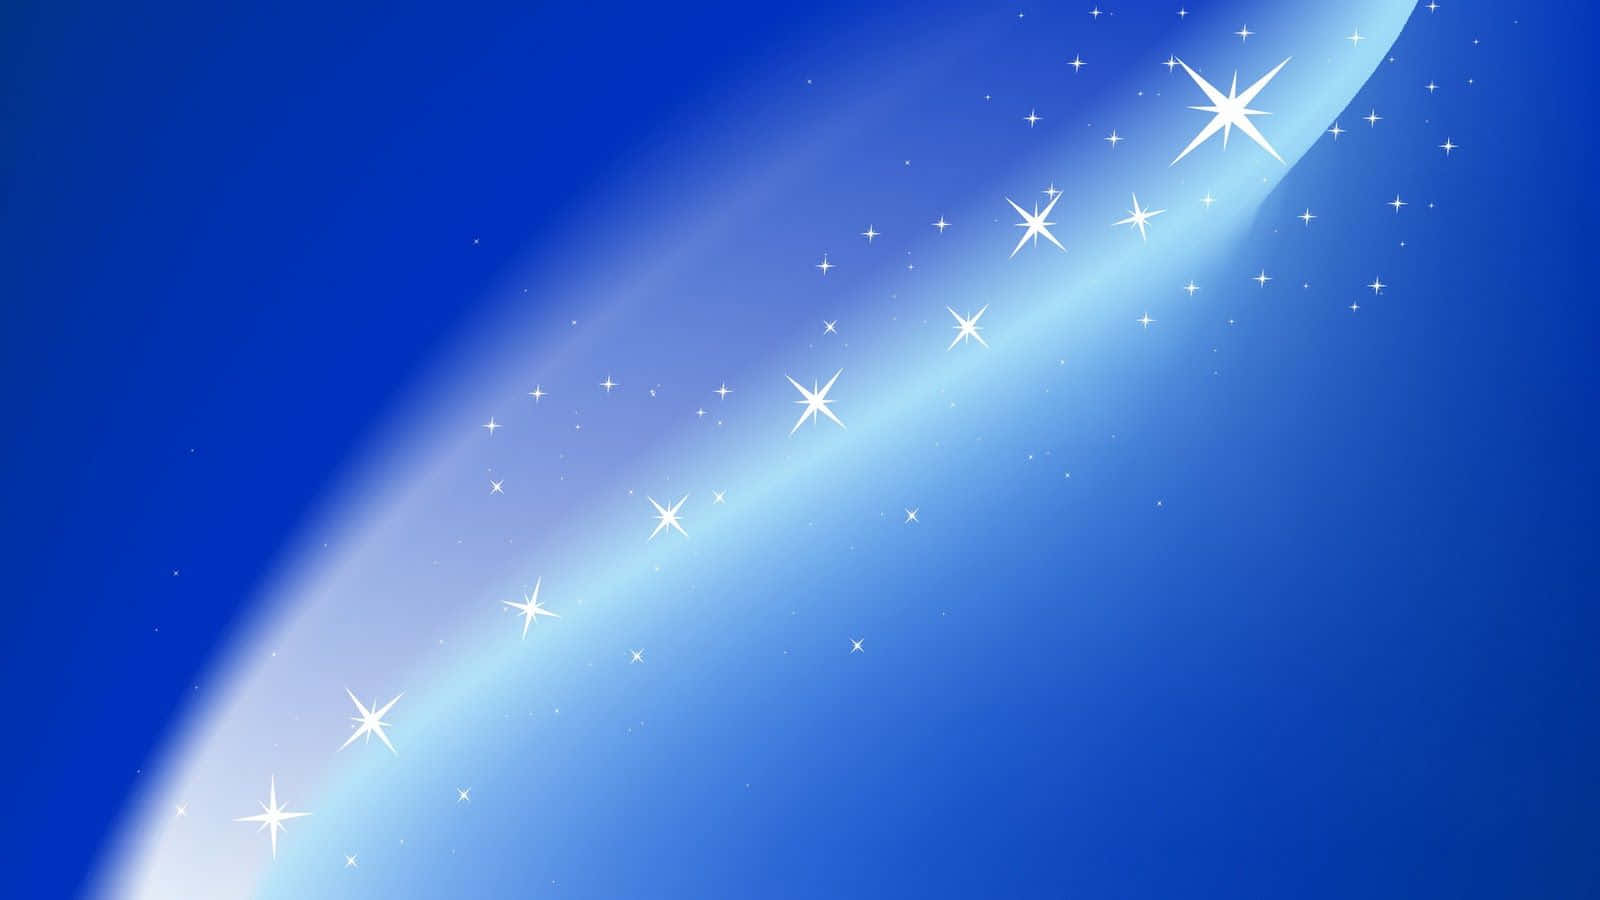 Magical Night Sky With Ray Of Light And Many Stars Wallpaper